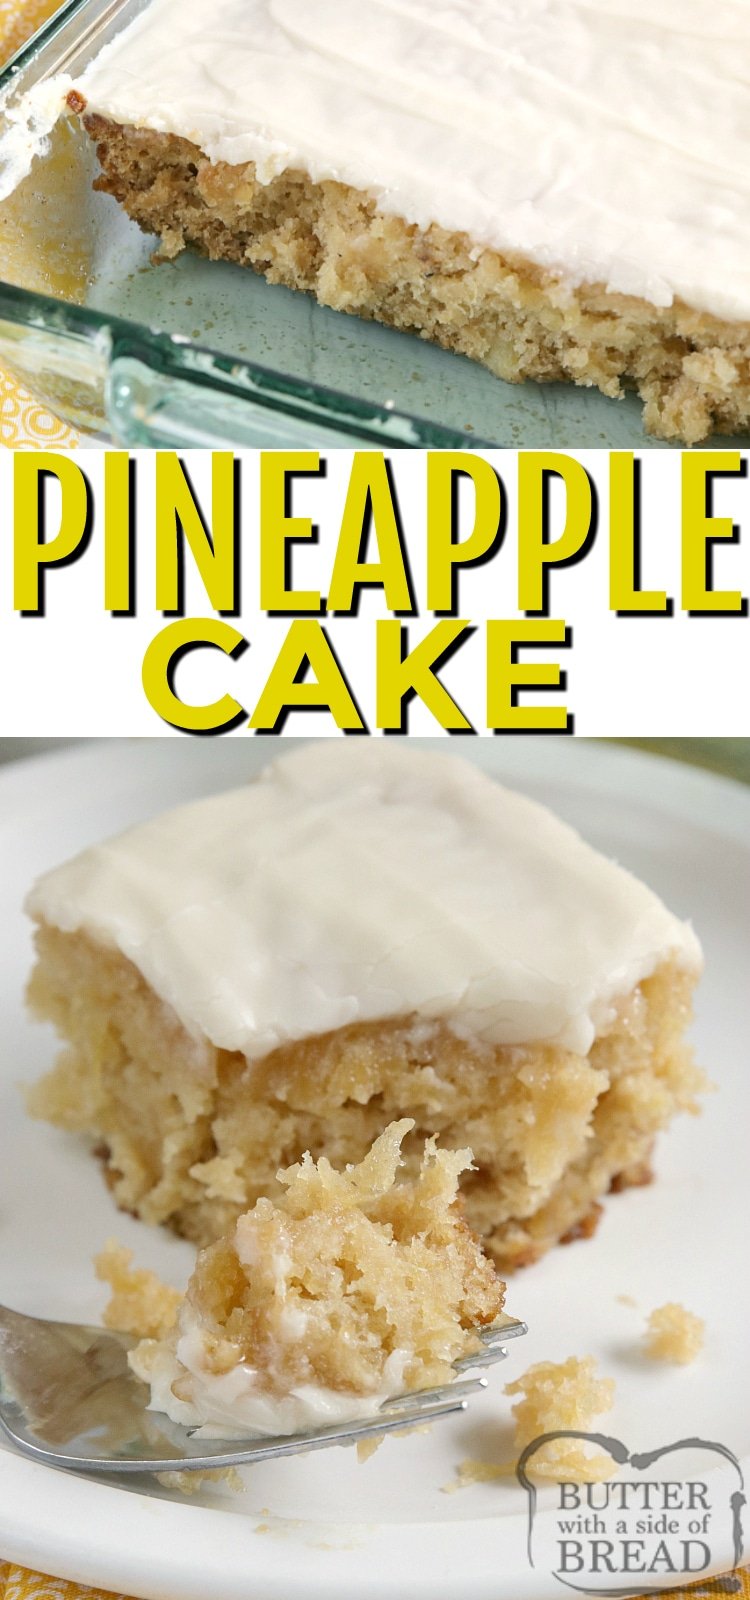 Easy Pineapple Cake made with crushed pineapple, then topped with a simple cream cheese frosting. This easy cake recipe is perfectly moist and full of flavor!